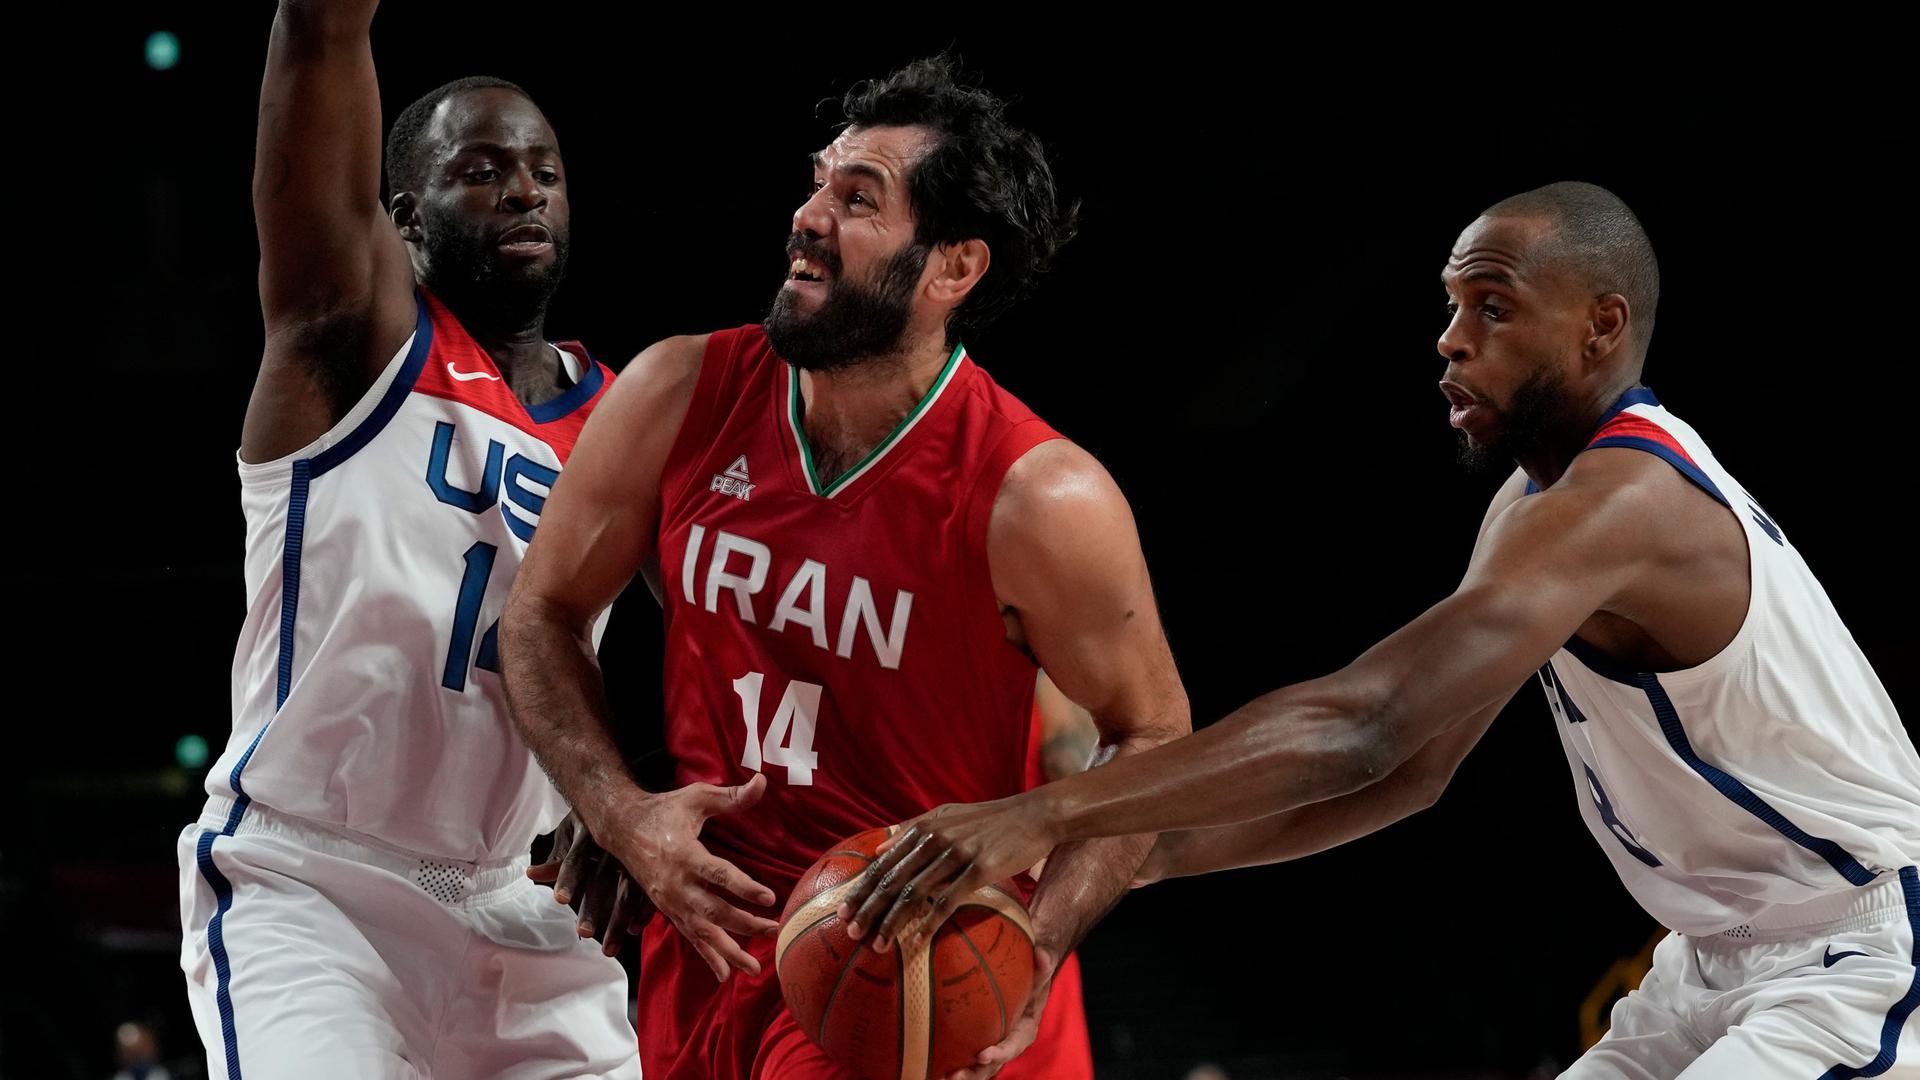 Two basketball players dressed in white US uniforms are shown on either side of a player wearing a red Iranian uniform.